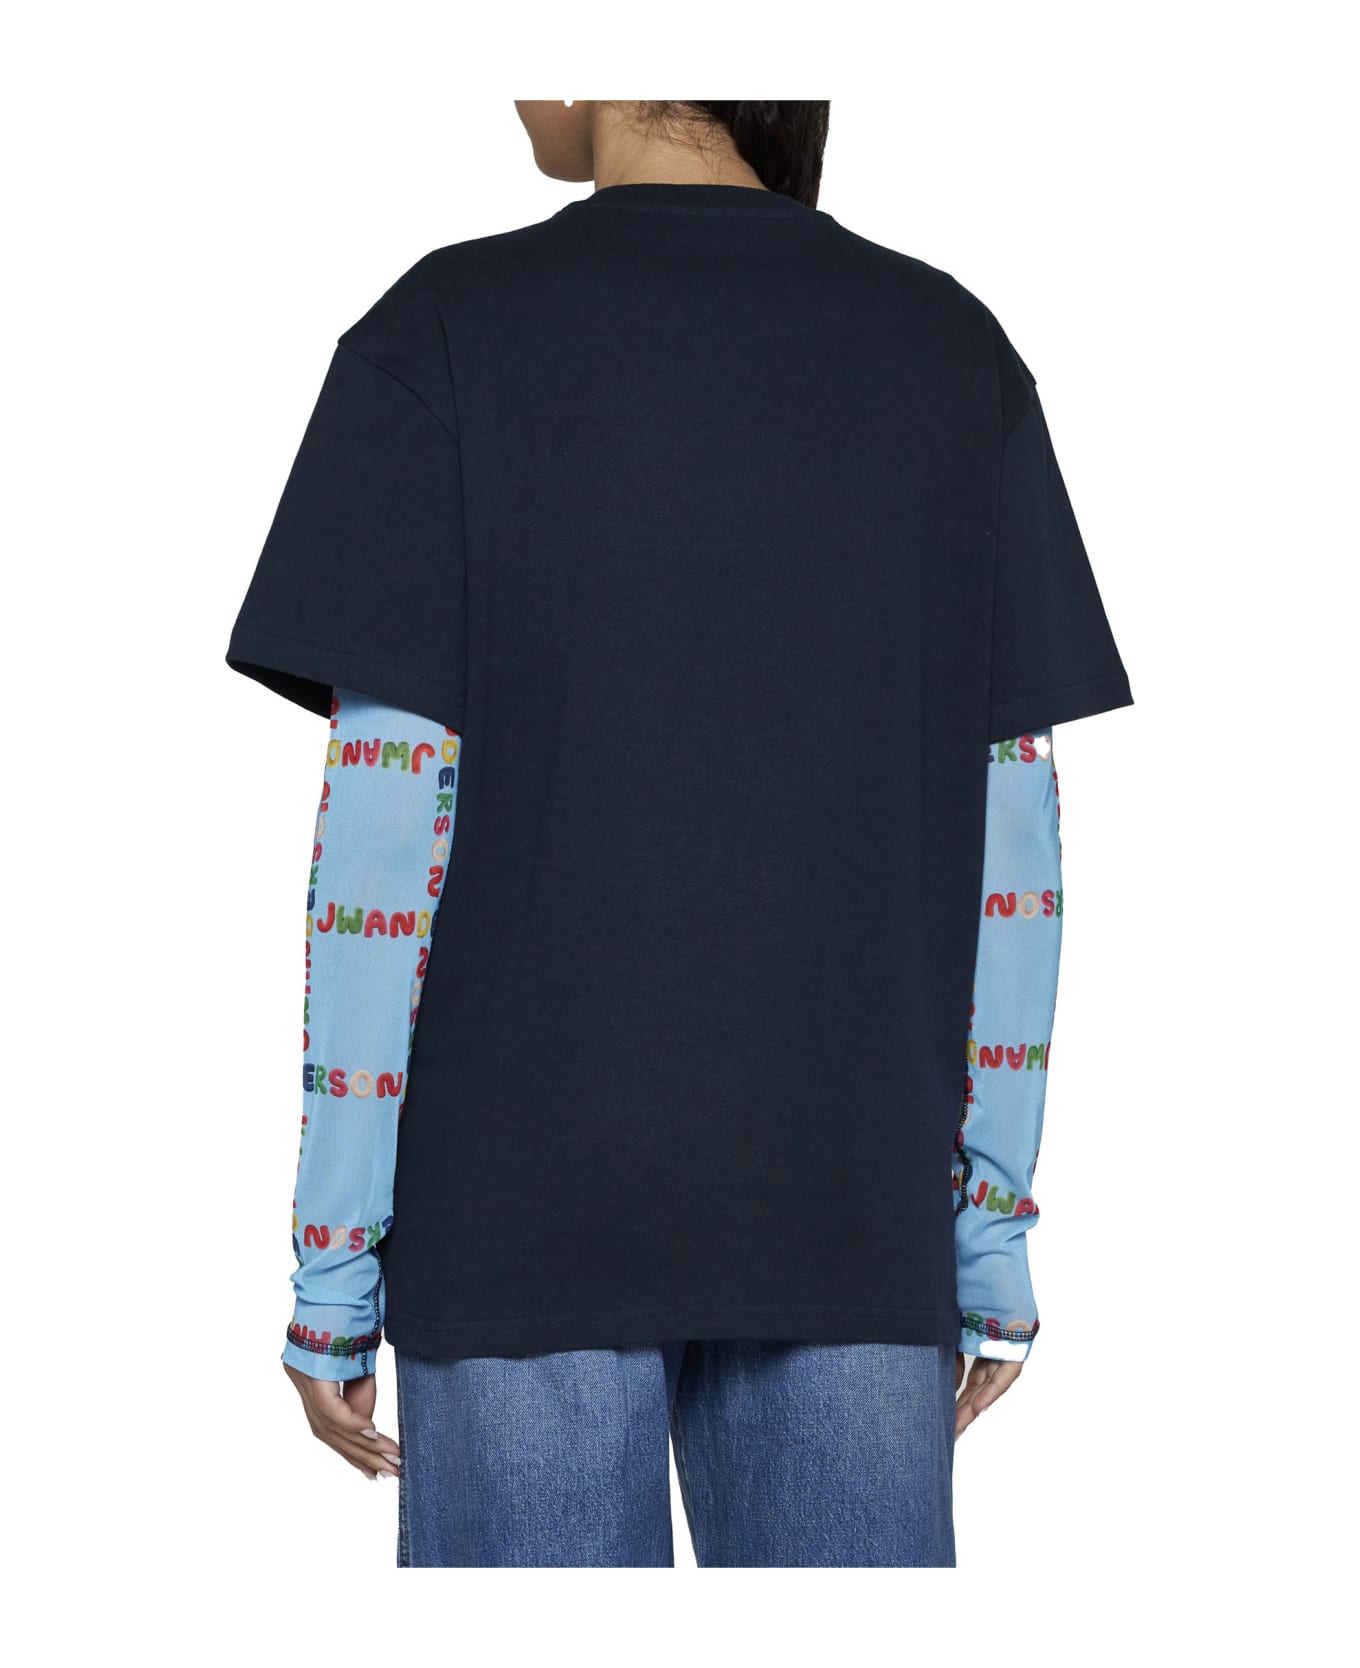 J.W. Anderson T-Shirt - Navy Tシャツ